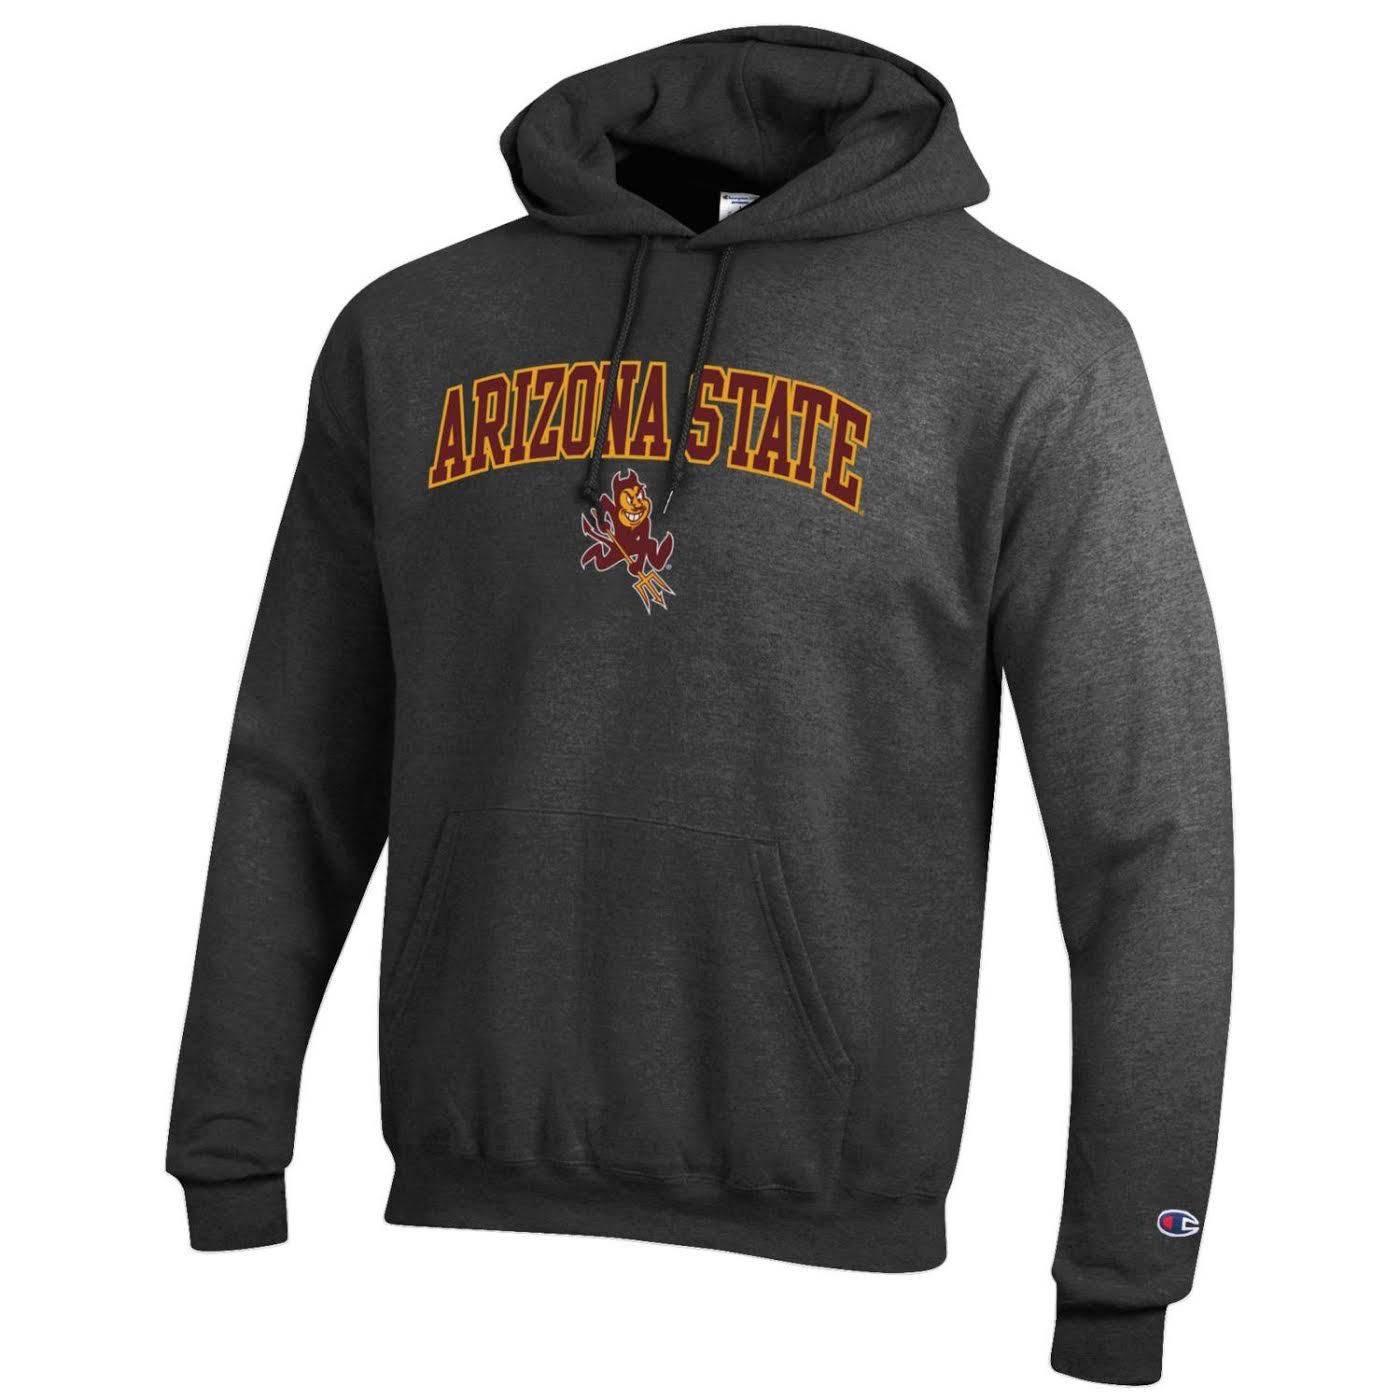 ASU gray Champion hoody with single front pocket and 'Arizona State' arched over Sparky